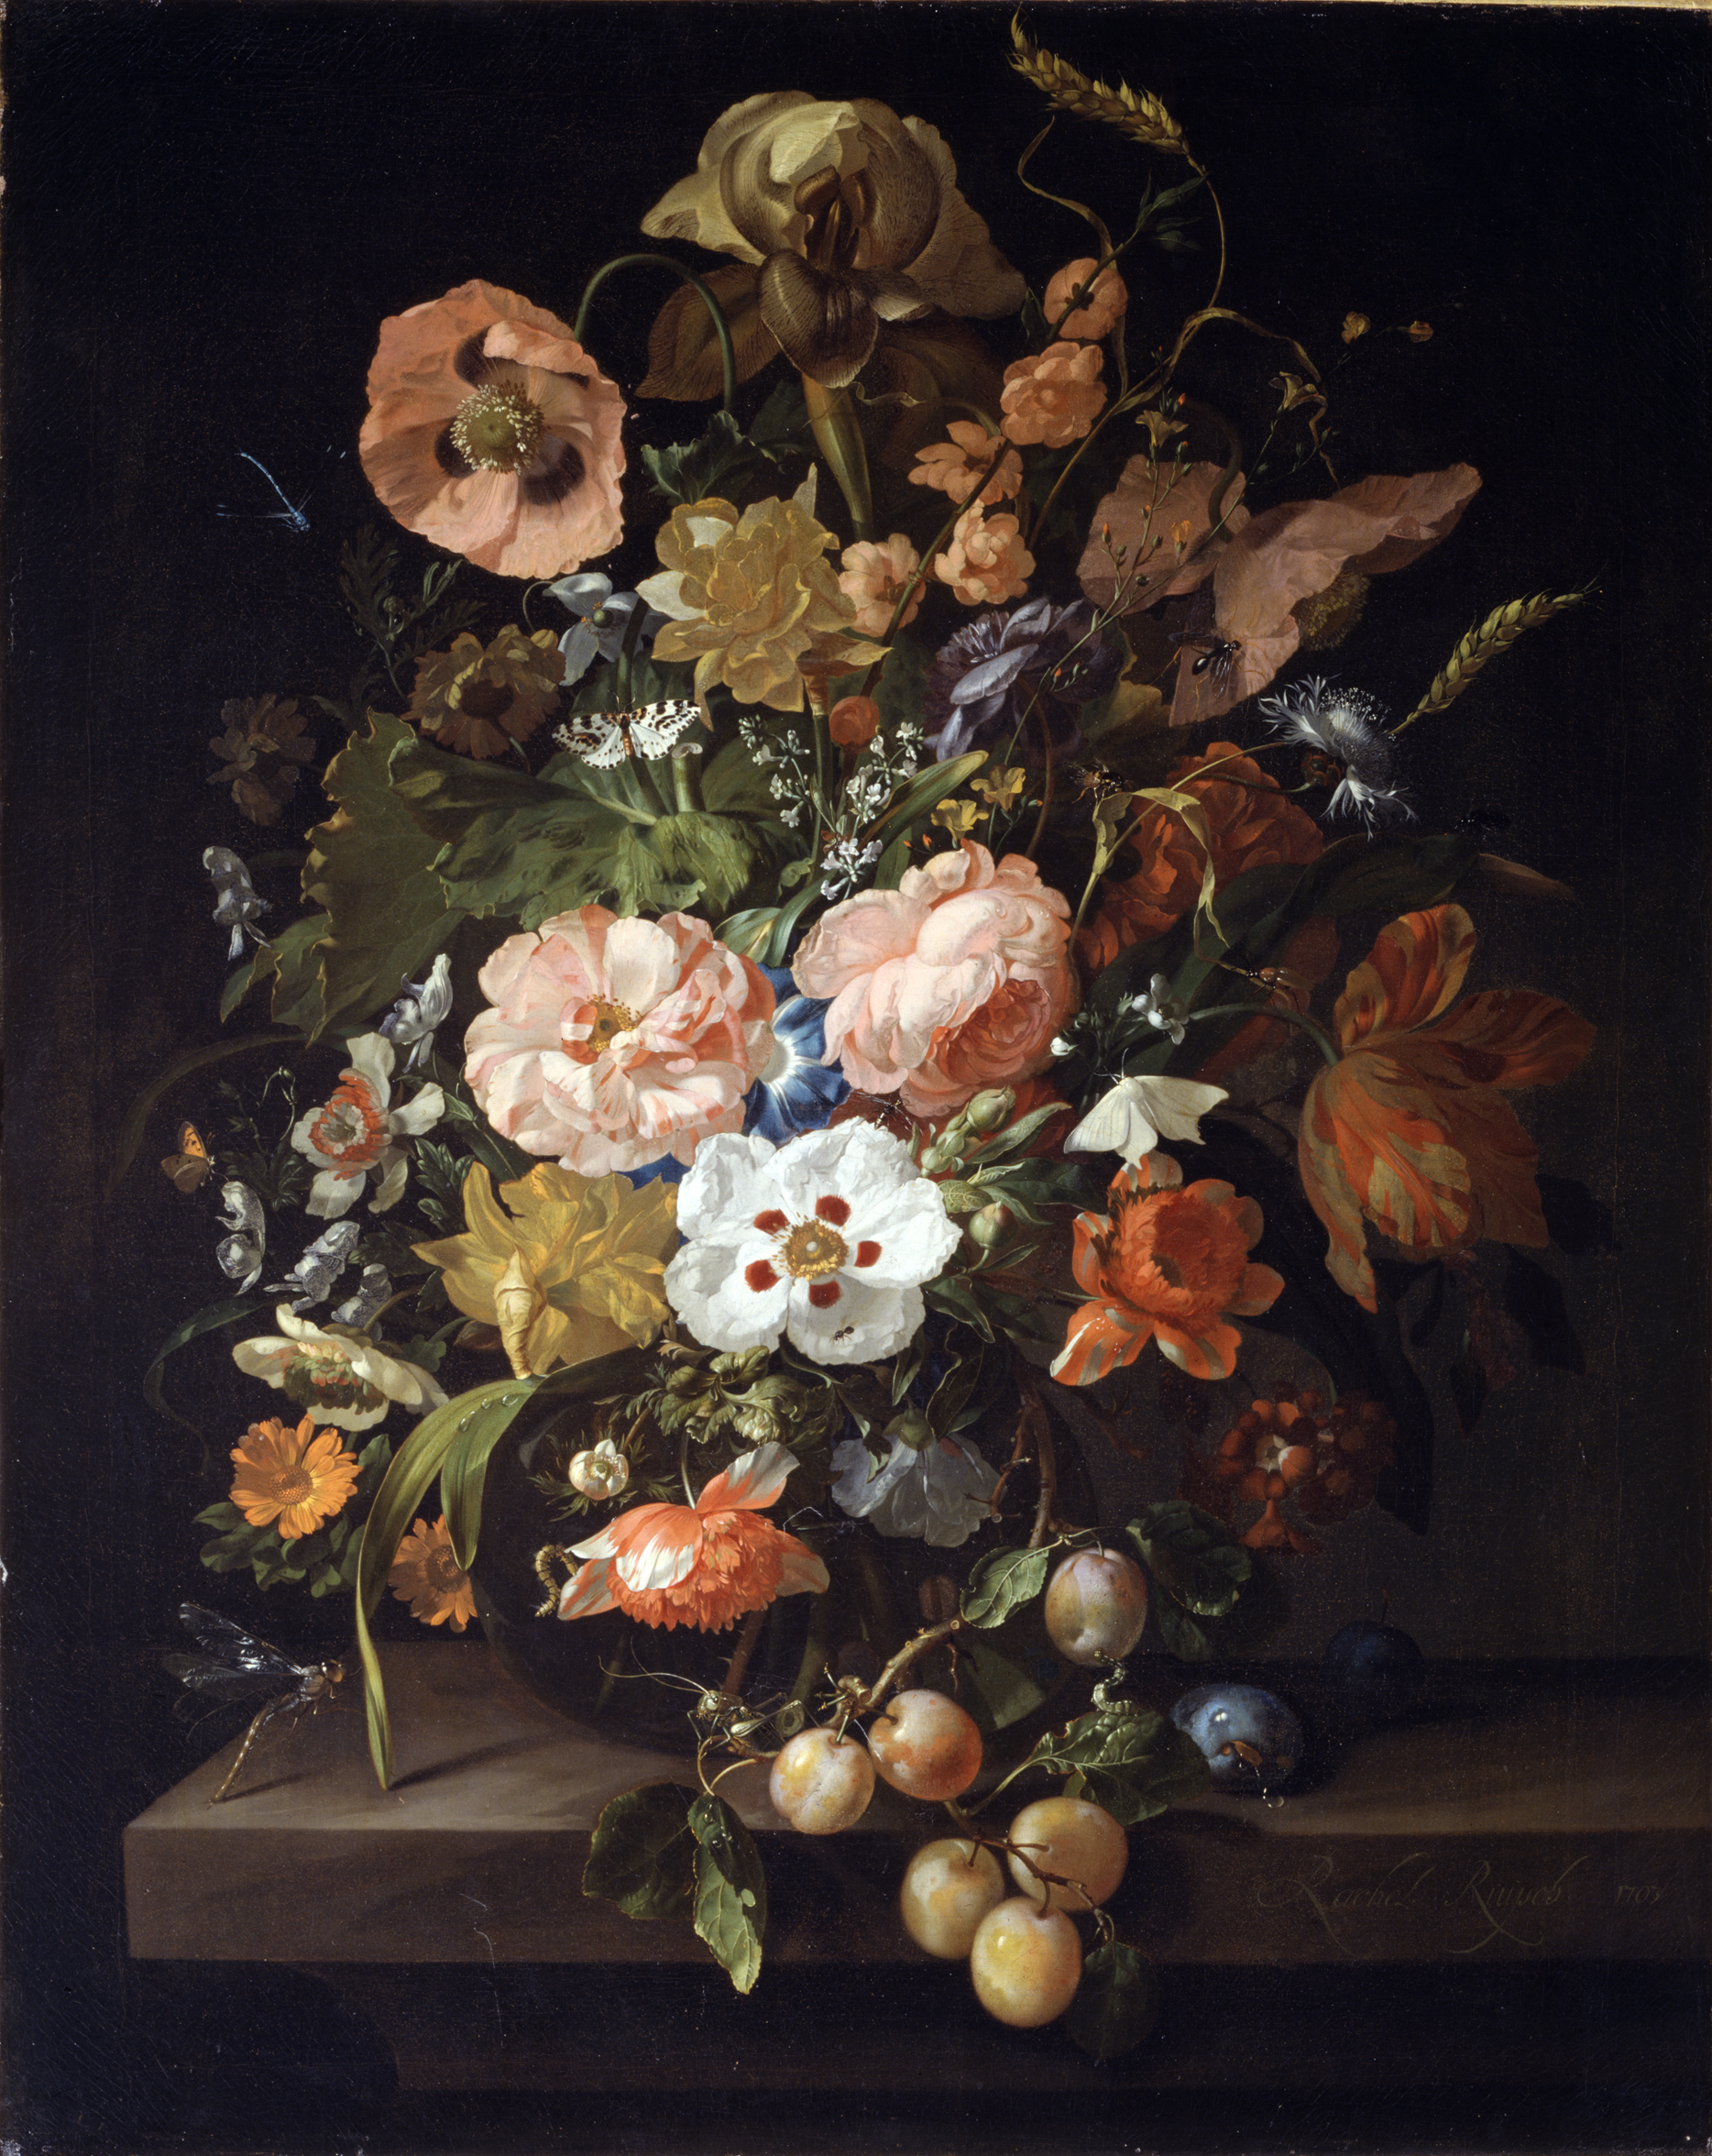 Still Life with Flowers and Fruit by Rachel Ruysch - 1703 Academy of Fine Arts, Vienna